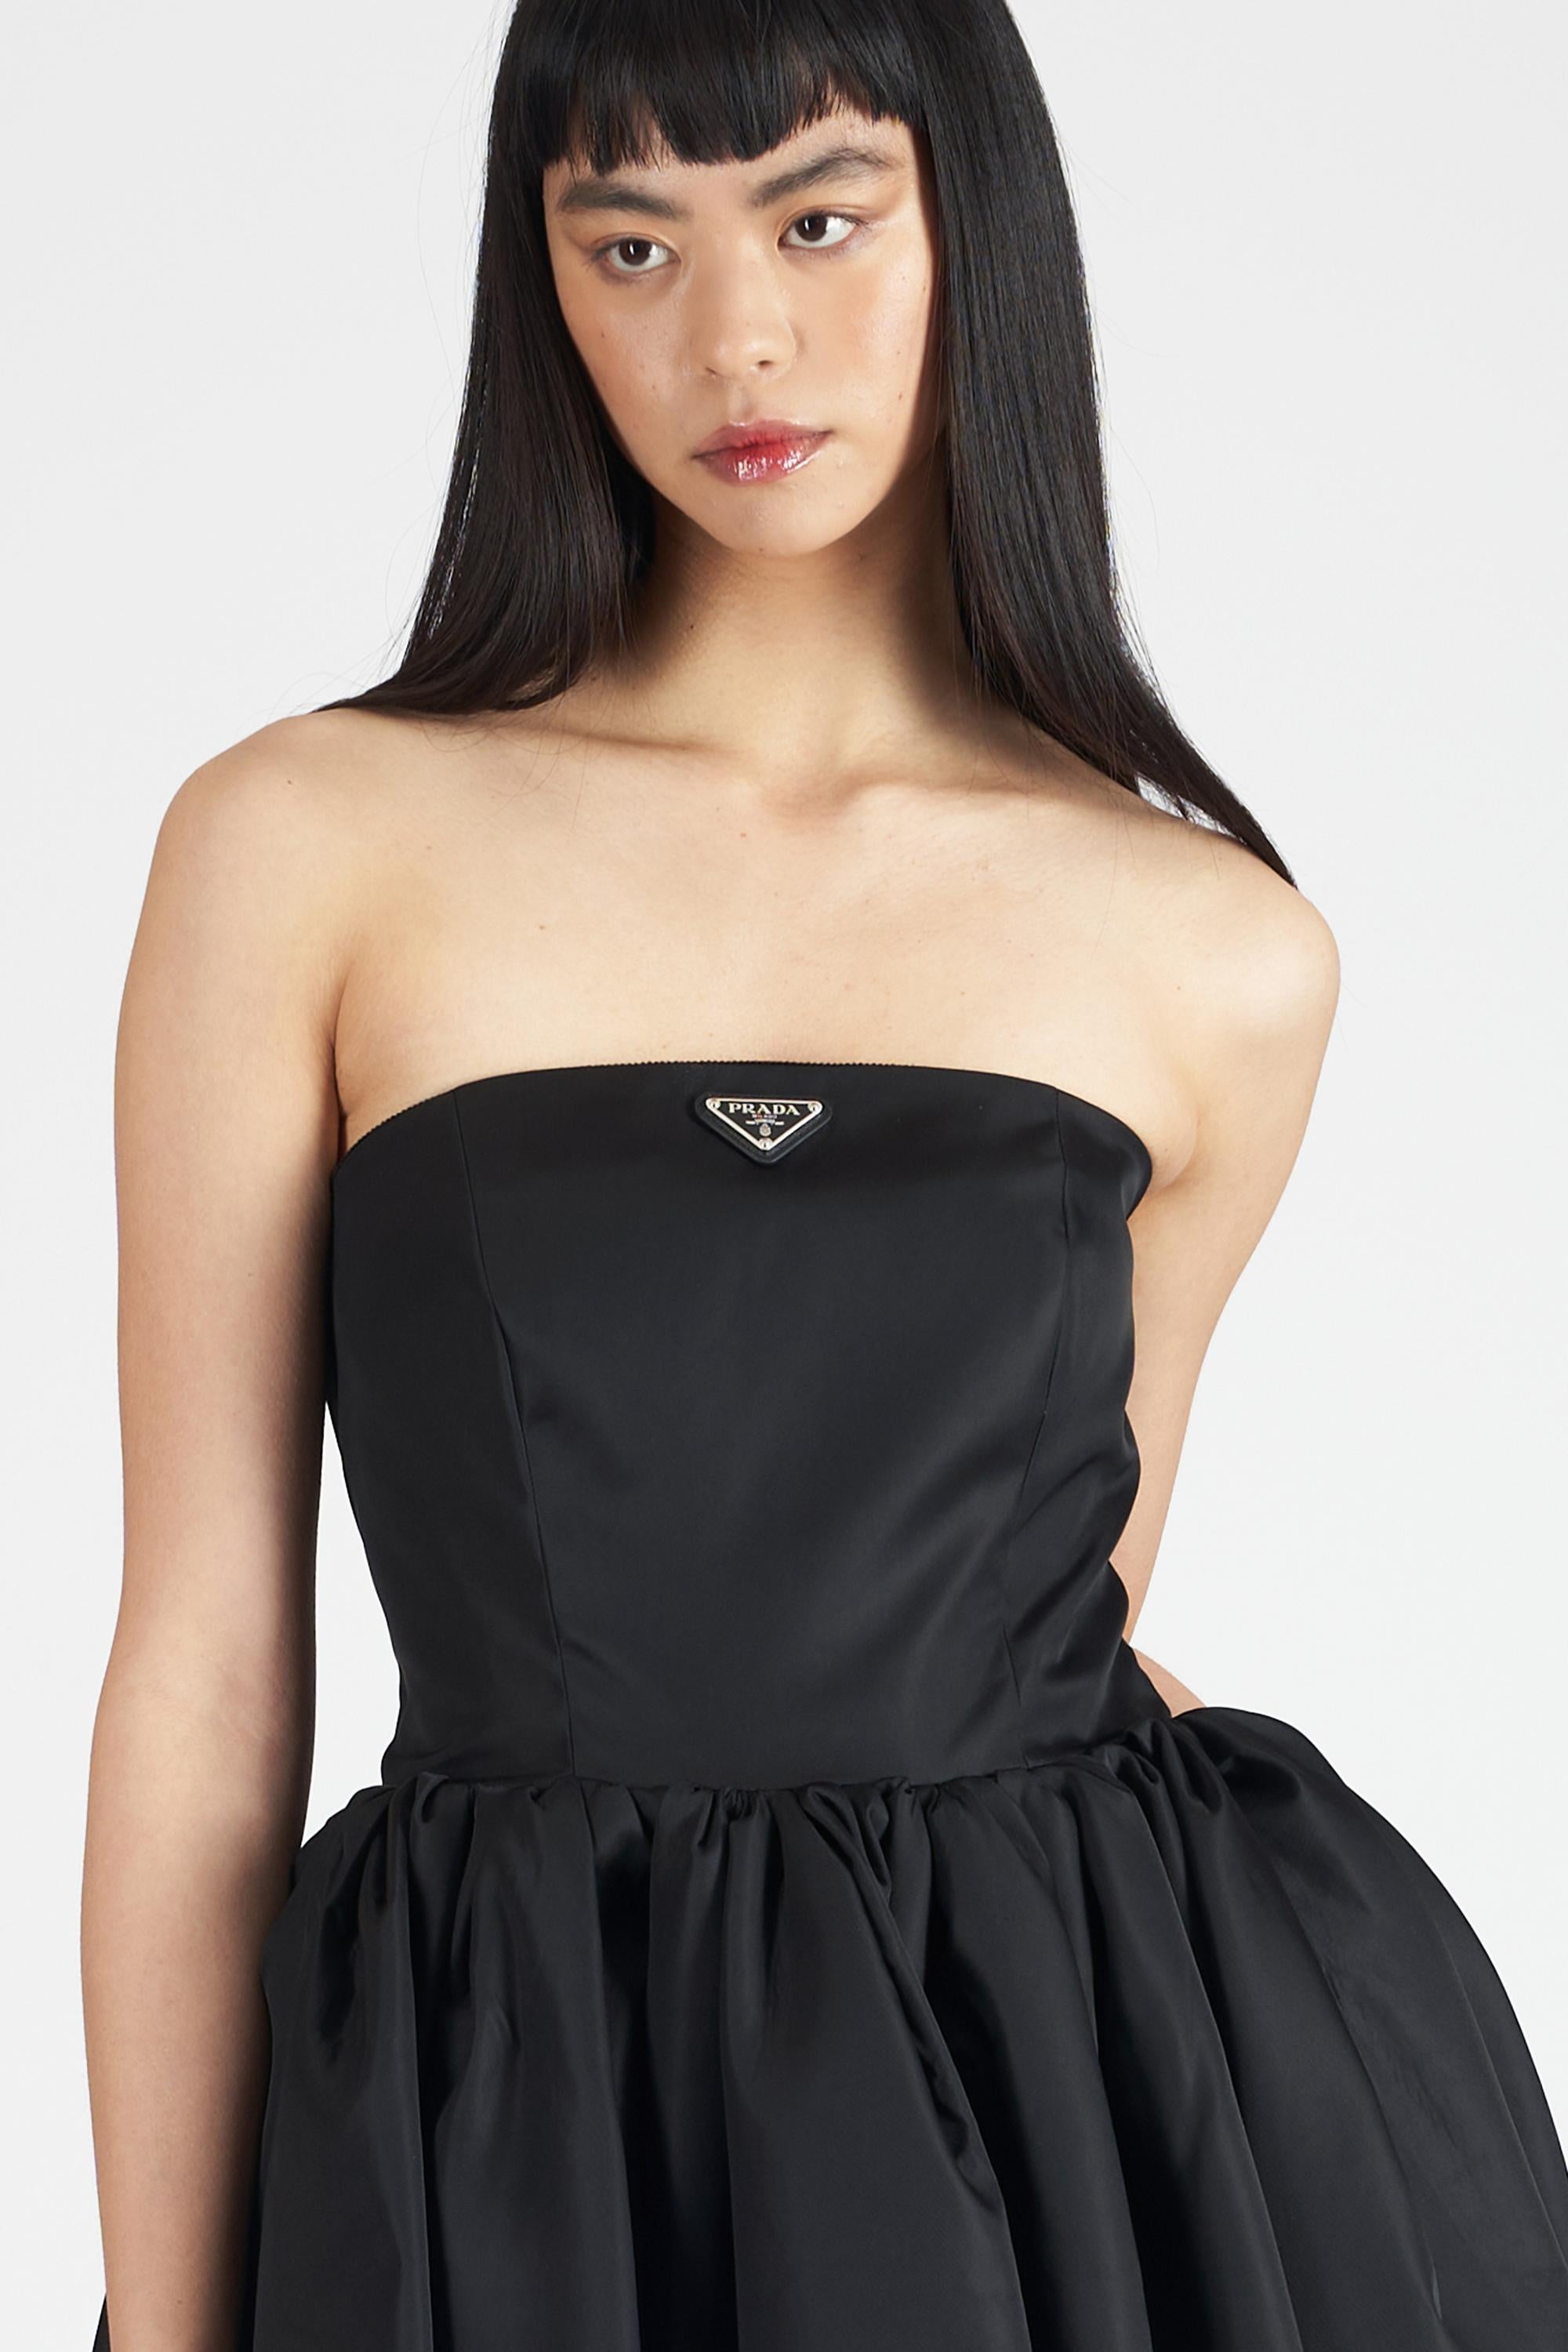 Prada 2020 bustier strapless dress. Features volumised skirt, bustier neckline, boning and midi length with tags. In excellent vintage condition.

Brand: Prada
Size: UK 8
Color: Black
Label size: 44 IT
Modern size: UK 8, US: 4, EU: 38
Fabric: